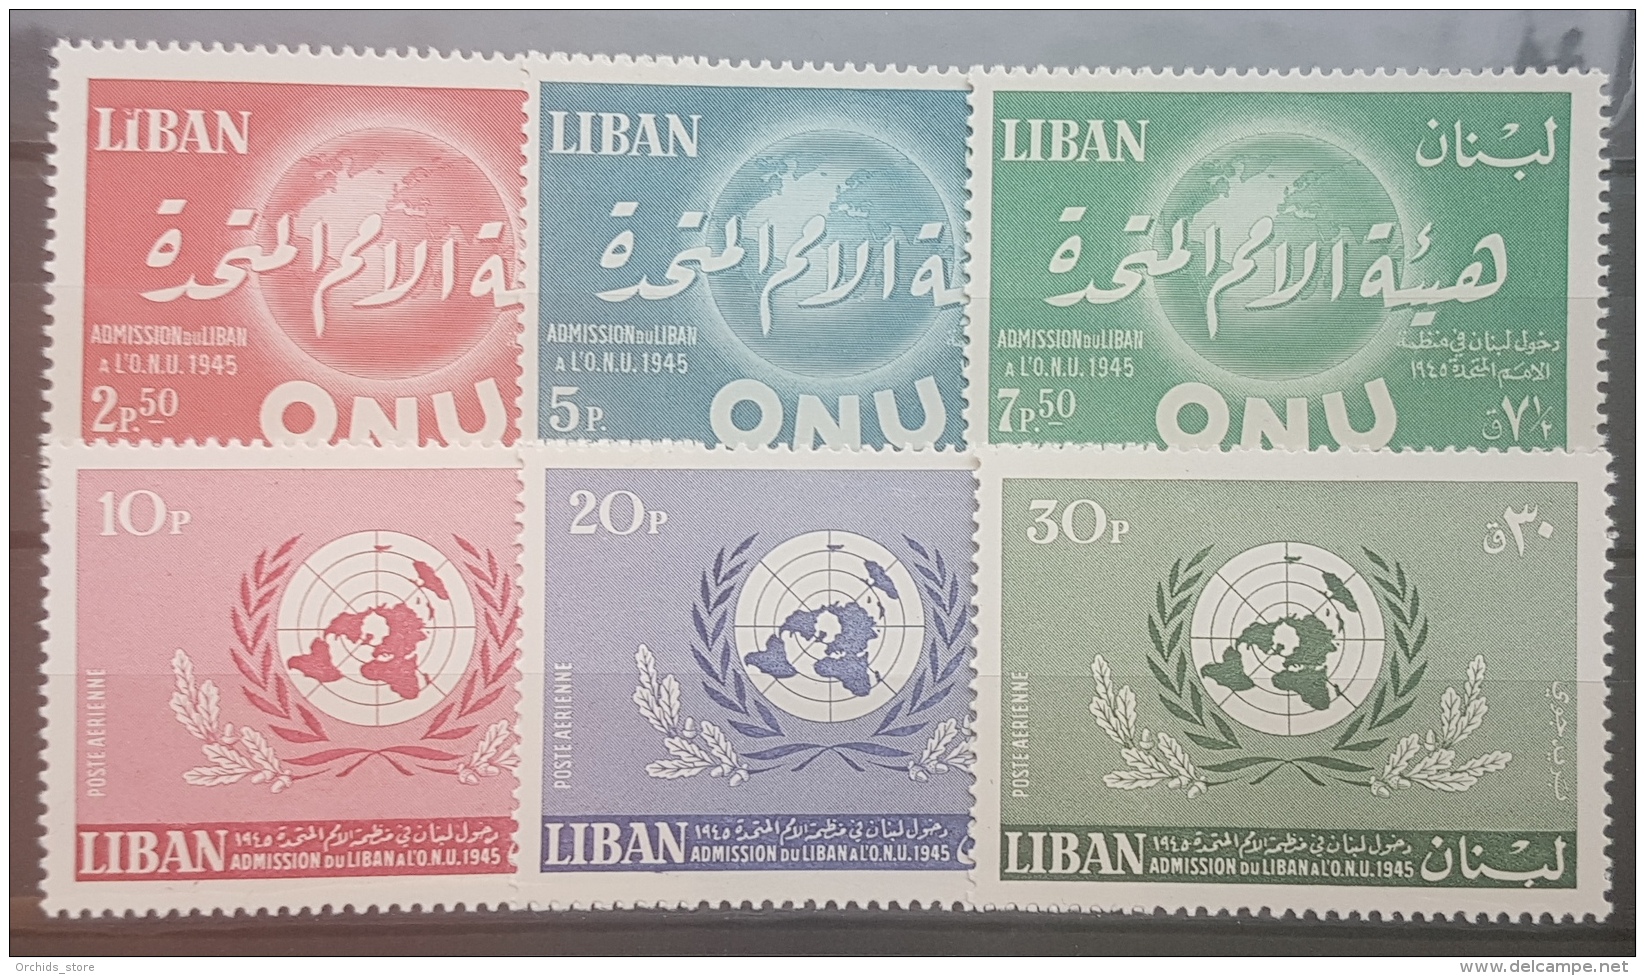 E1124Grp - Lebanon 1967 SG 986-991 Complete Set 6v. MNH - 22nd Anniv Of Admission To The United Nations UNO - Libano